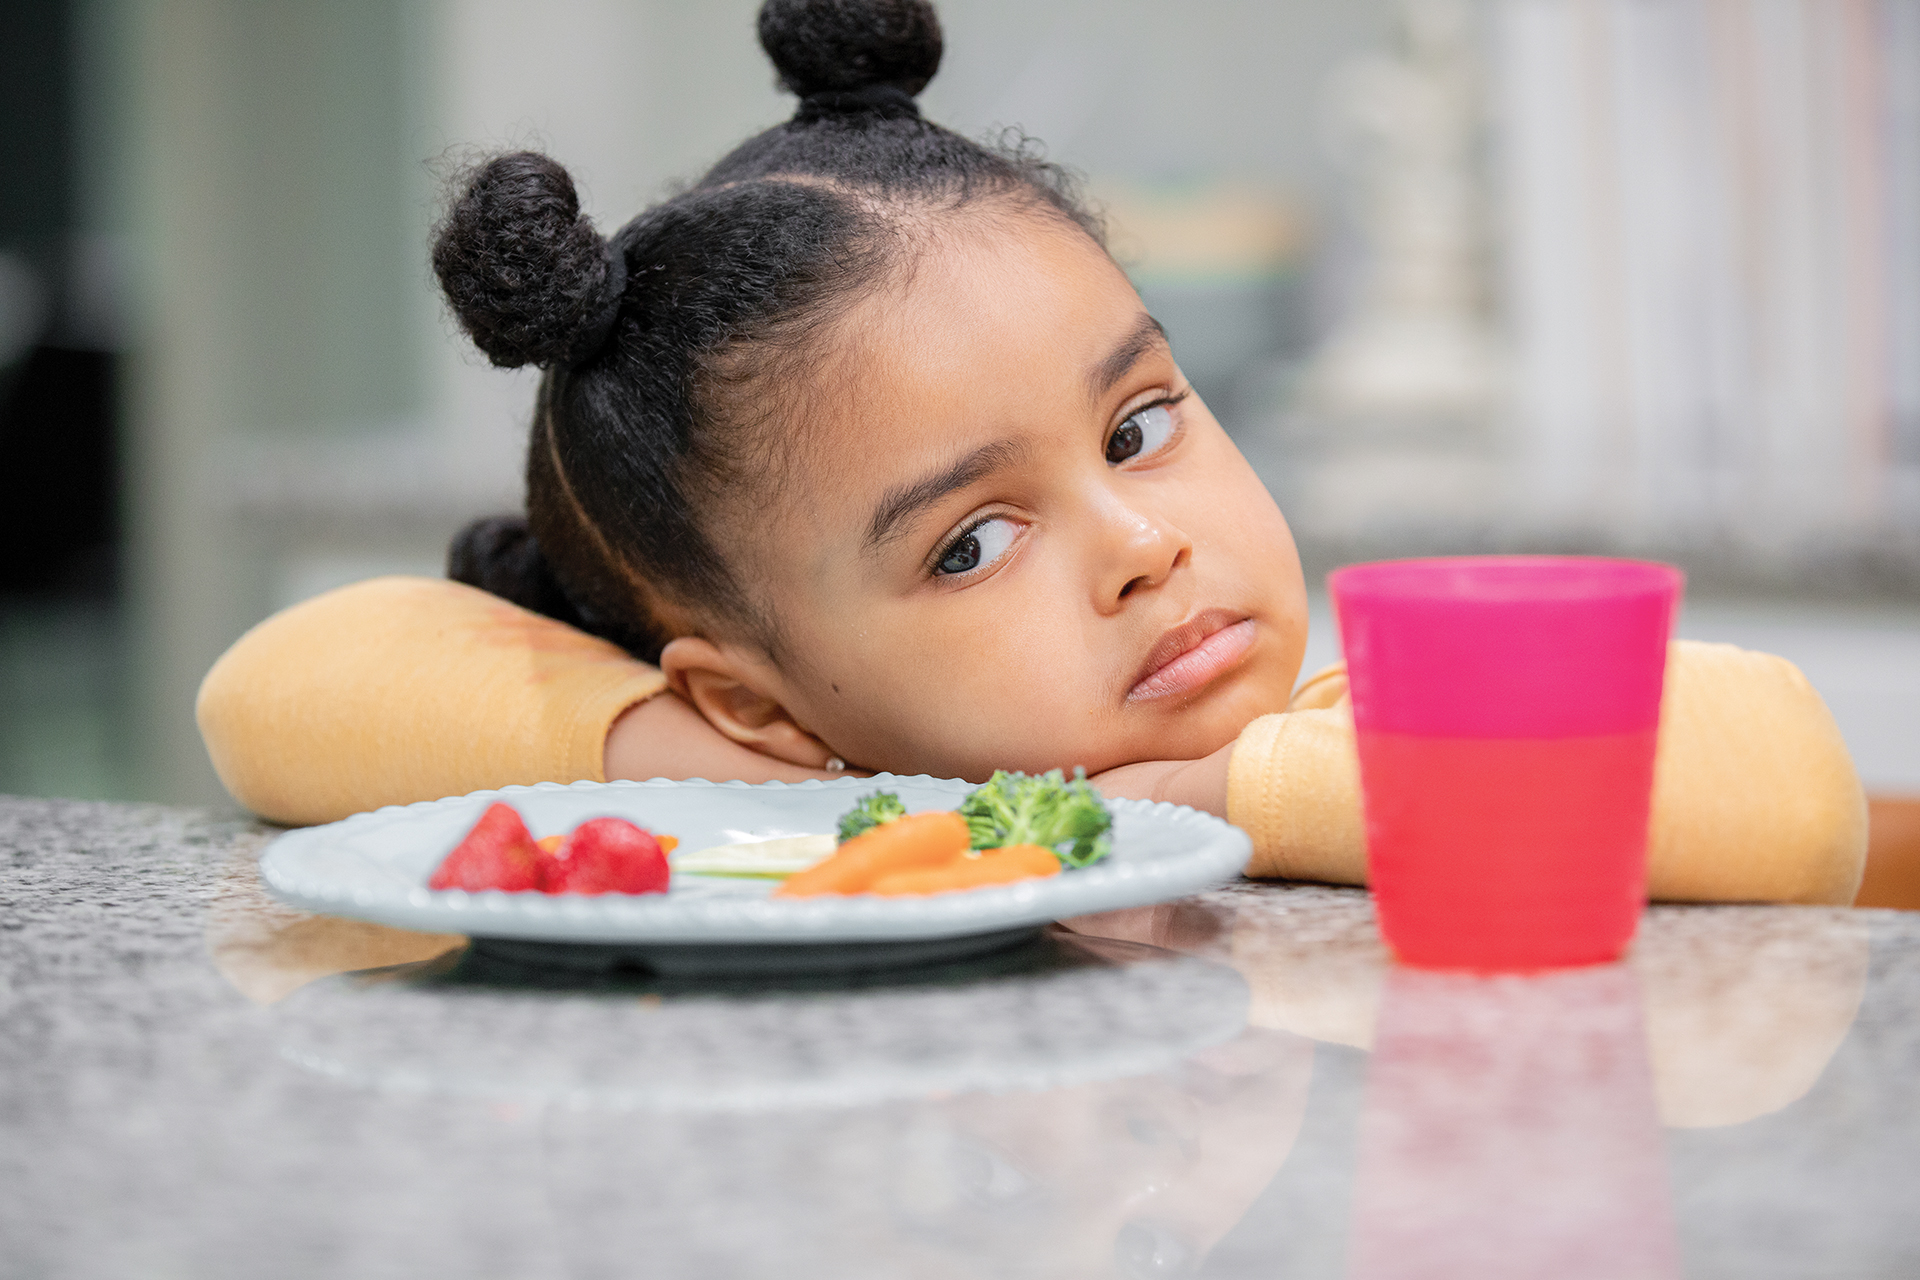 Picky Eater… or Typical Toddler? Tips to Handle a Choosy Eater